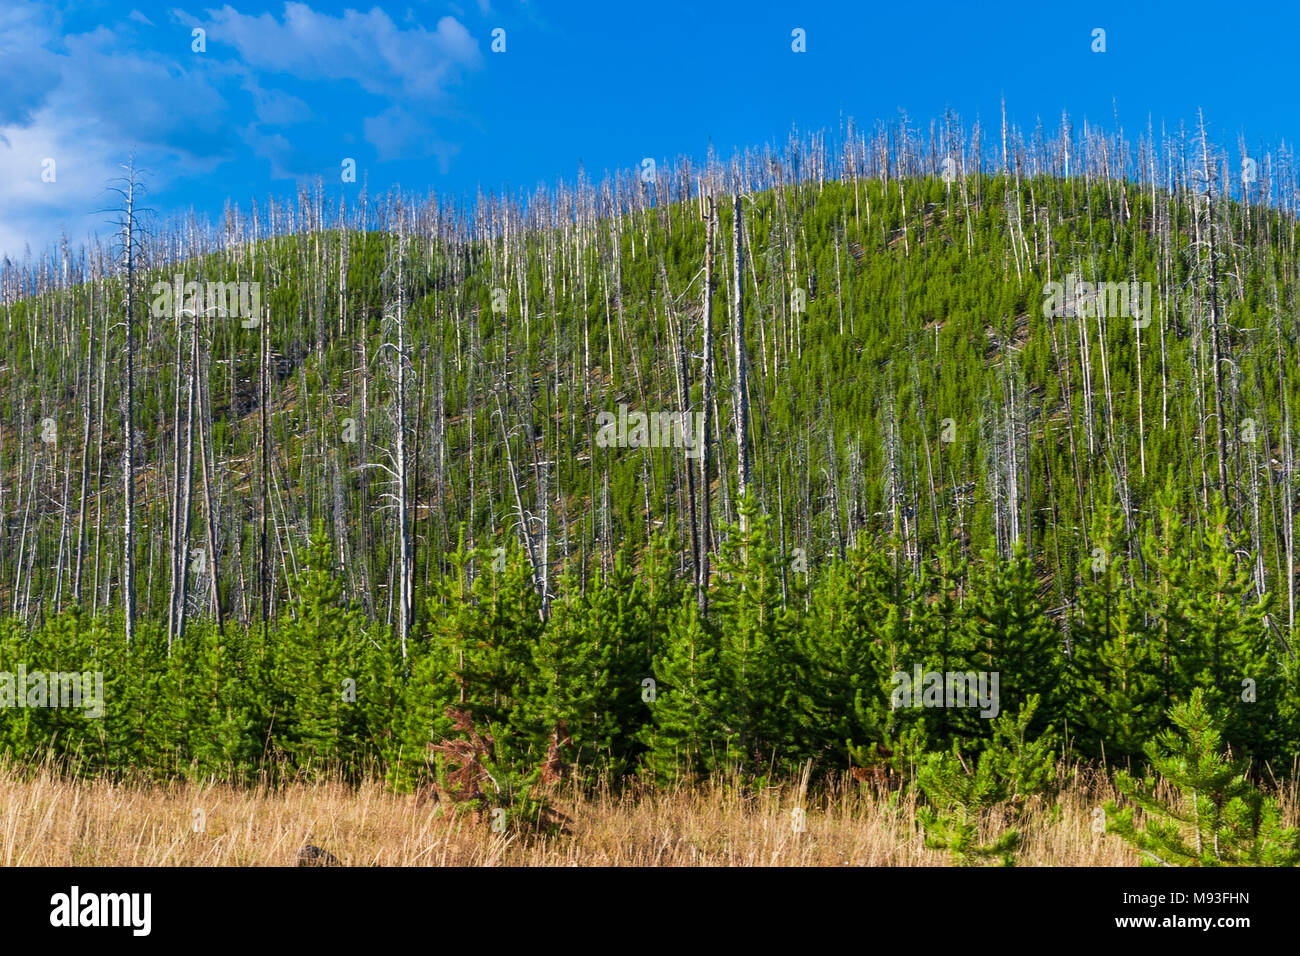 Re-growth of Lodge Pole Pines after disastrous fire burned thousands of acres in Yellowstone National Park, Wyoming. Stock Photo